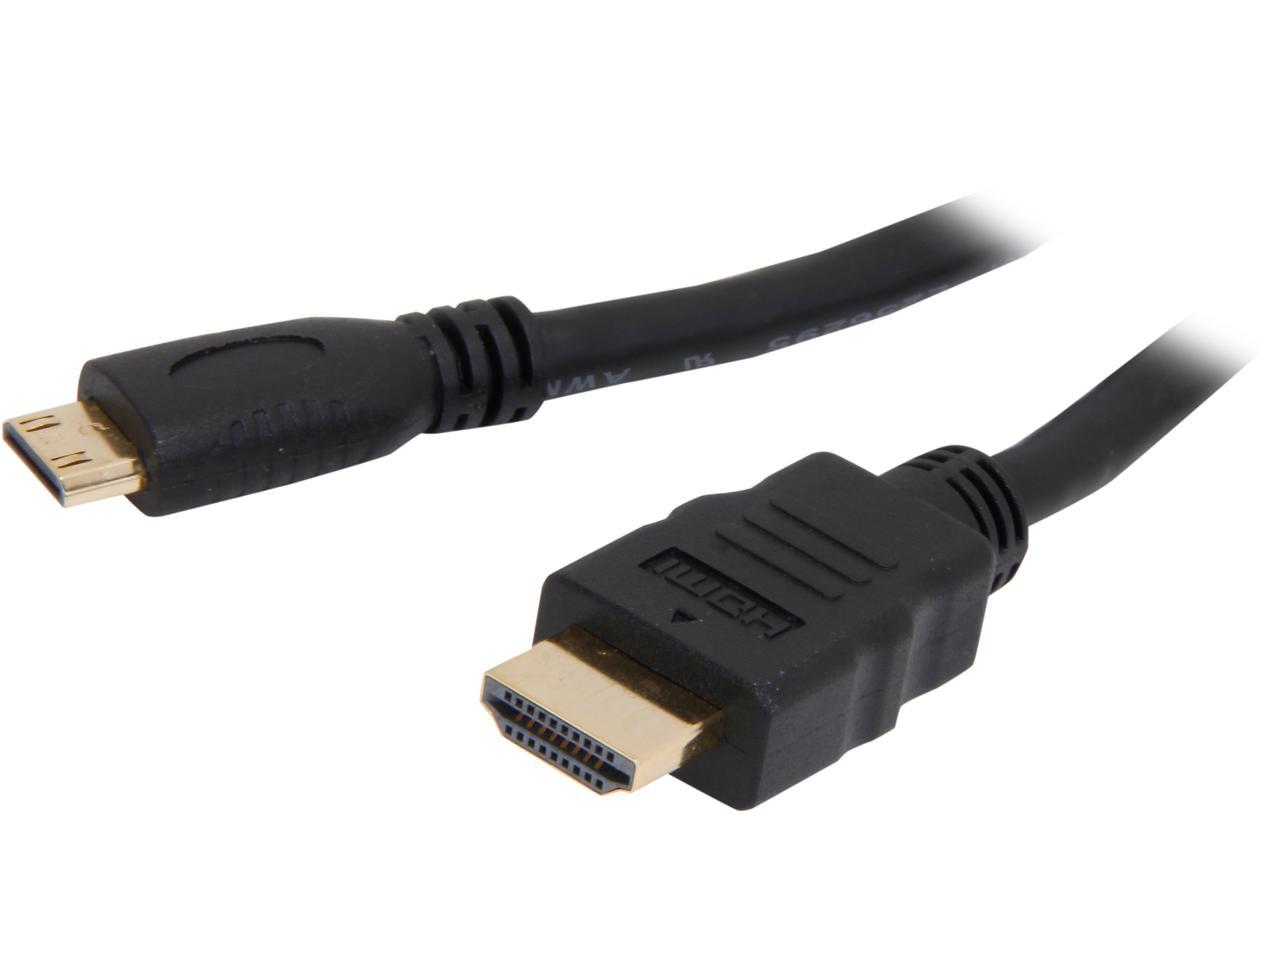 StarTech.com HDMIACMM6 6 ft. Black HDMI to Mini HDMI HDMI to Mini HDMI Cable for Digital Video Male to Male - image 1 of 3